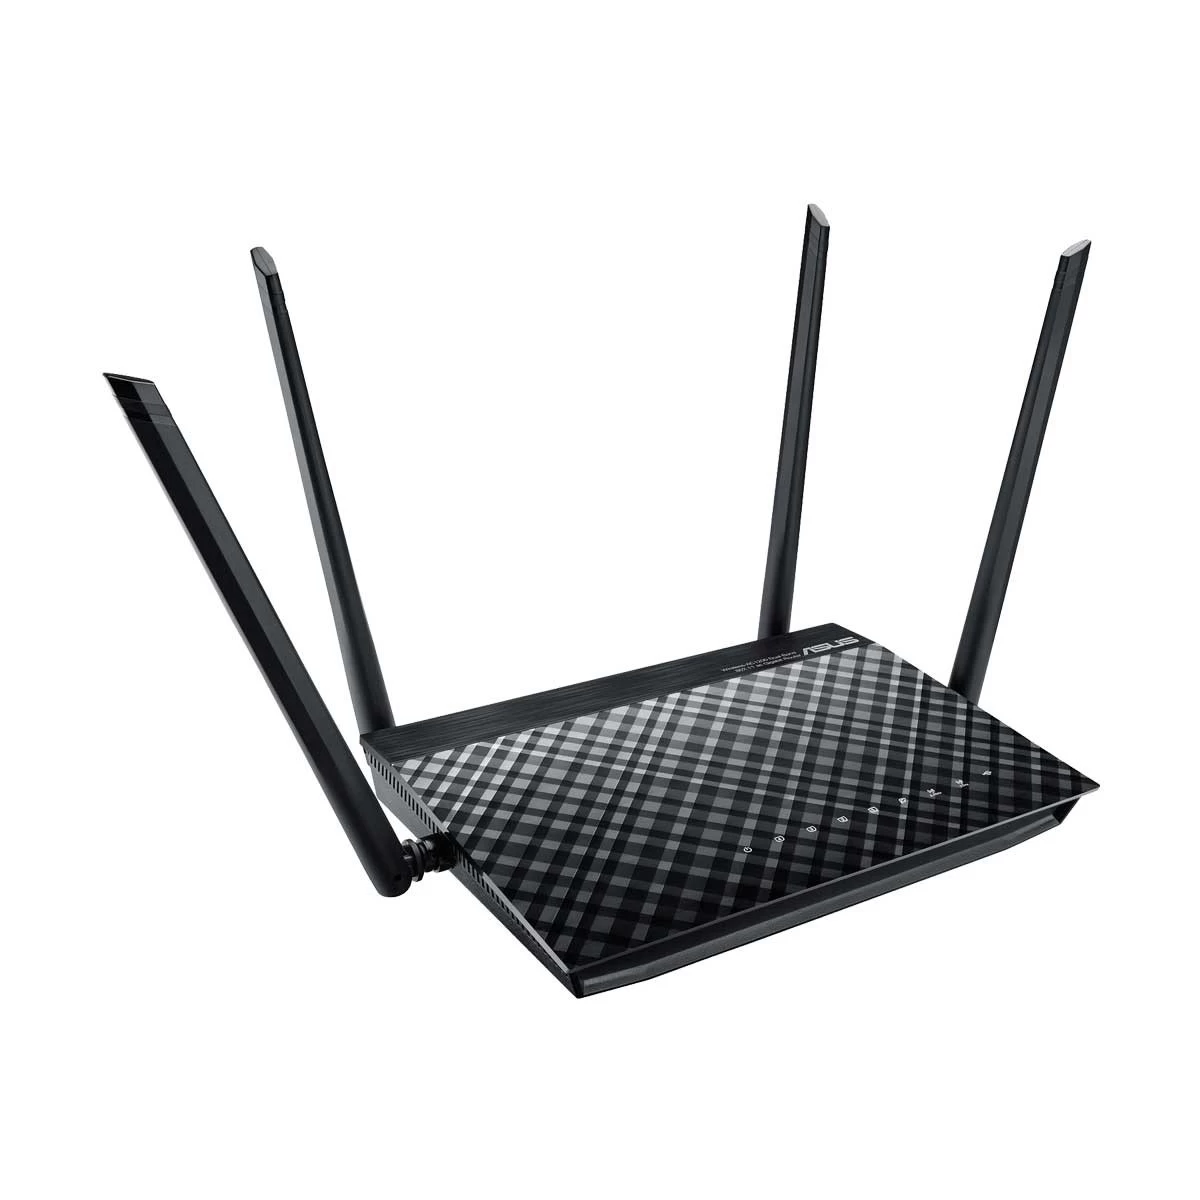 Asus RT-AC1200 V2 AC1200 Mbps Ethernet Dual-Band Wi-Fi Router